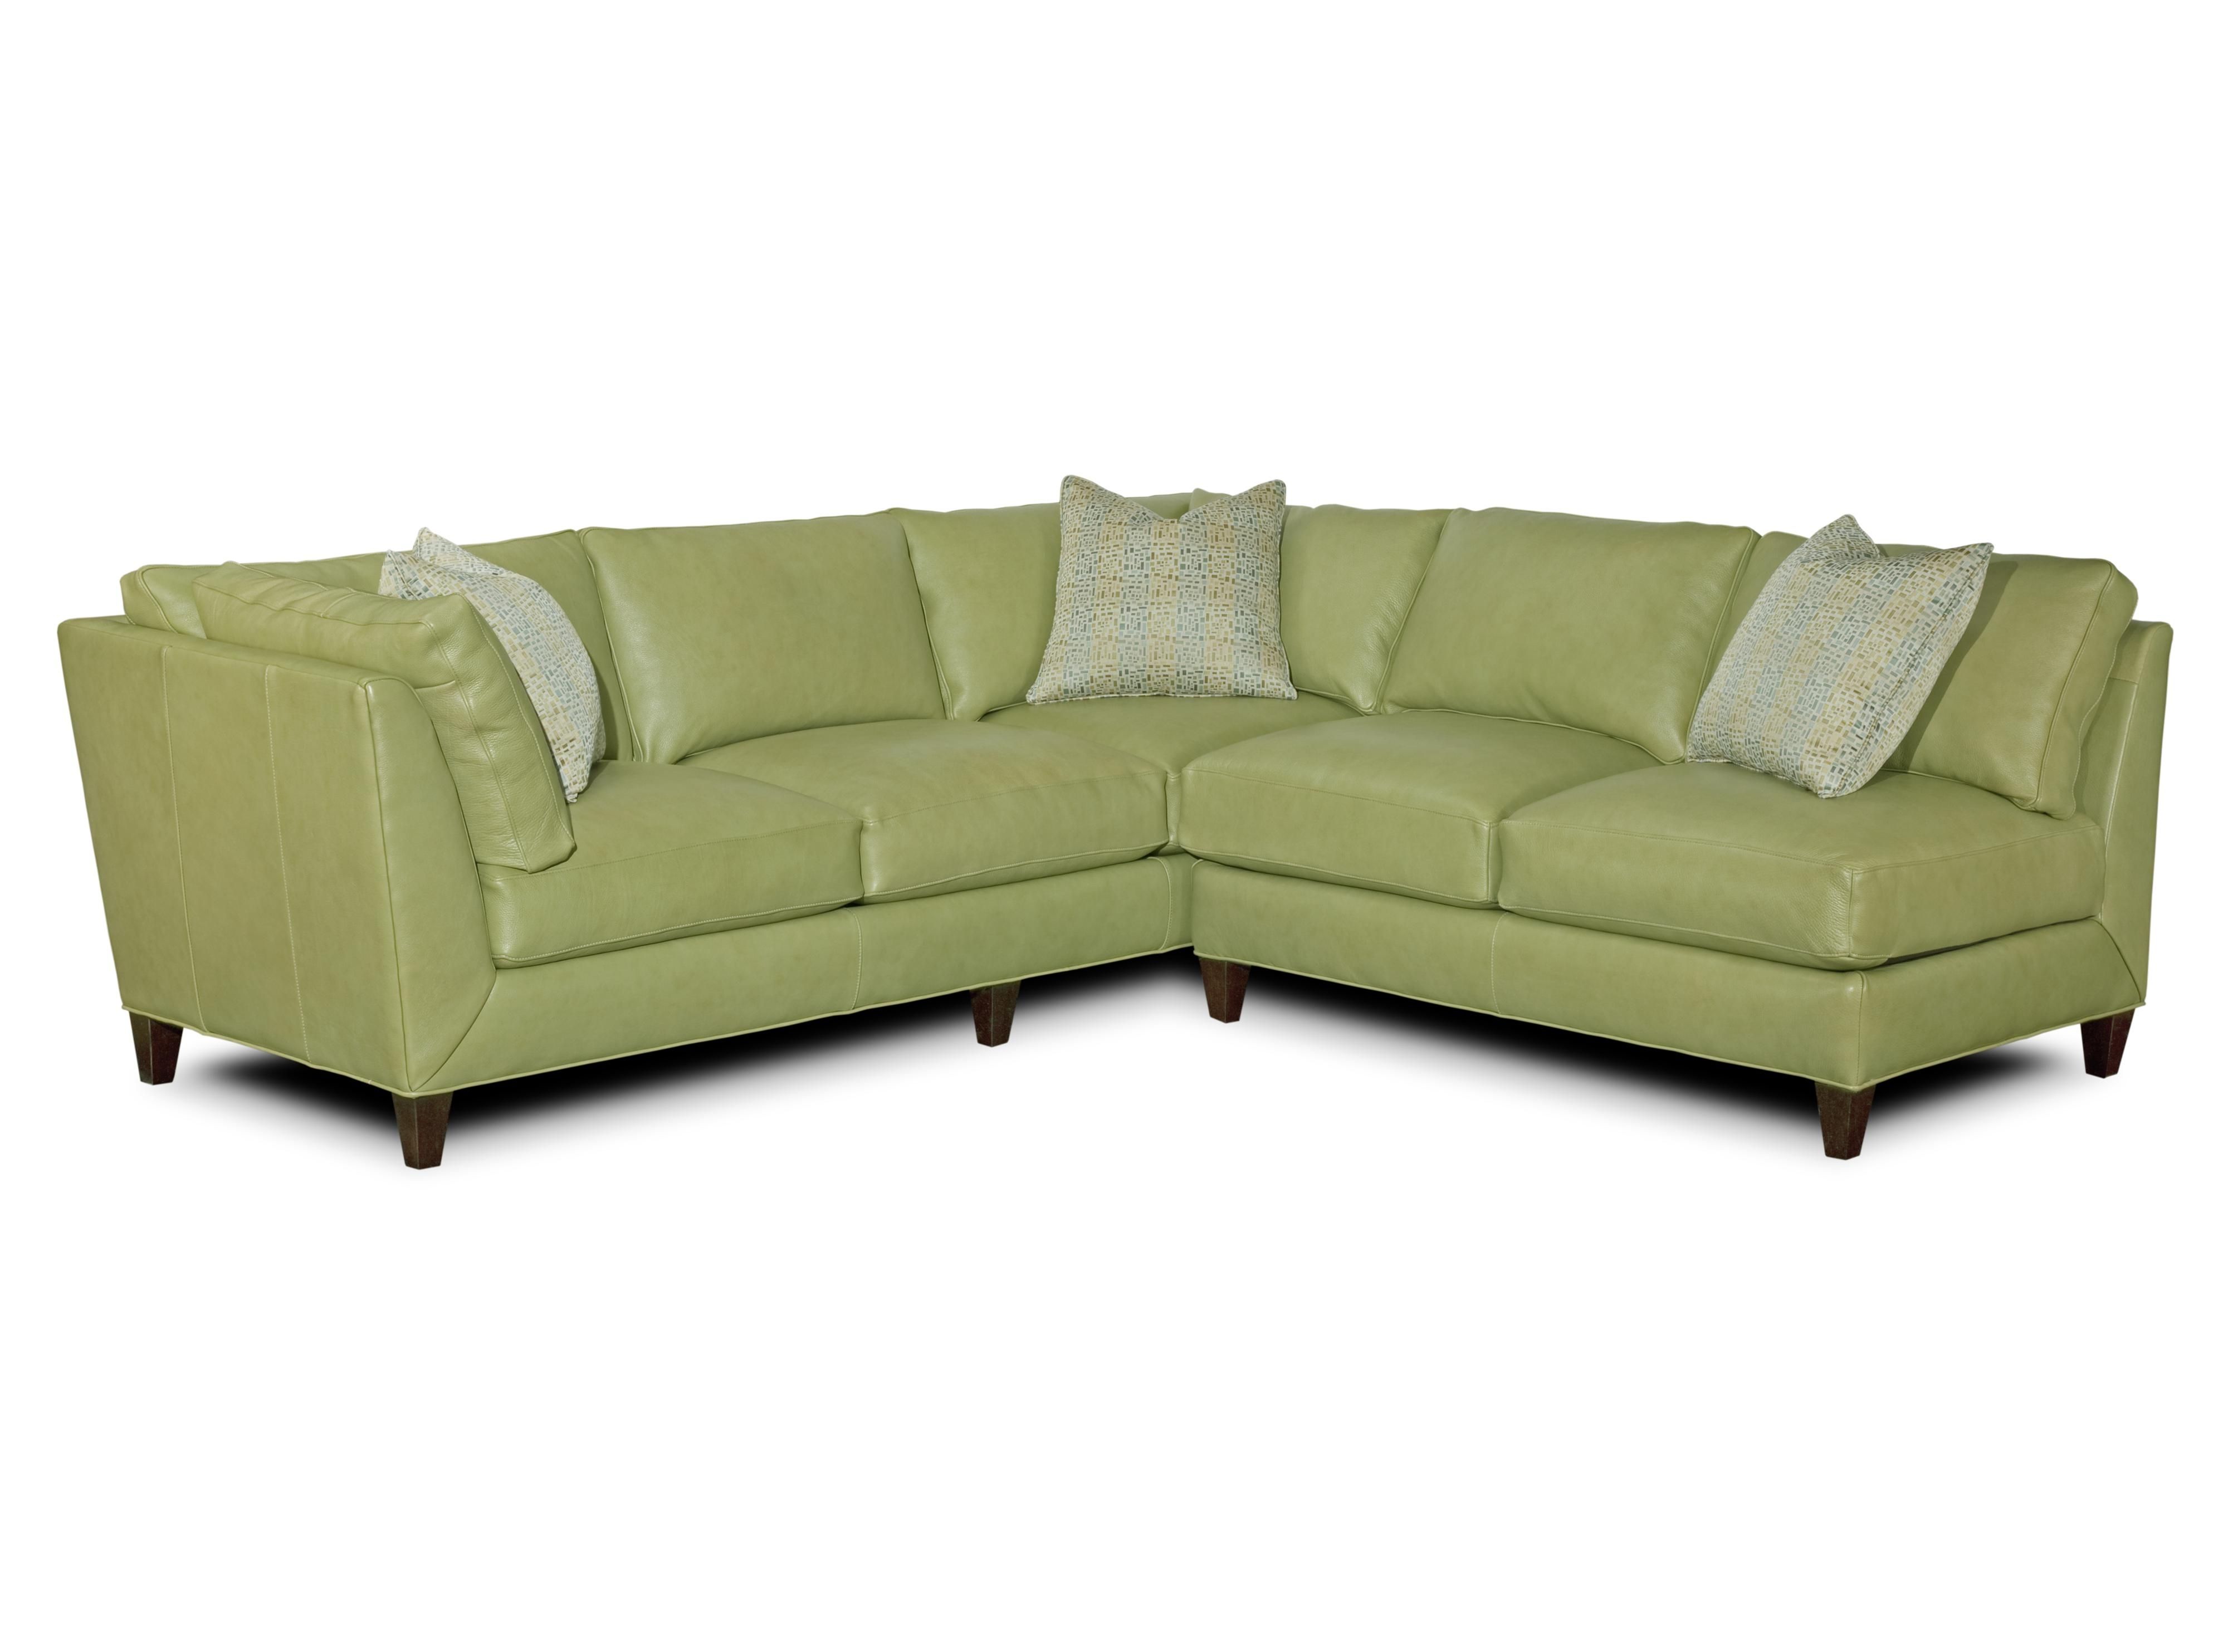 Visalia Ca Sectional Sofas With Popular Envisionbradington Young Wiki Sectional Sofa With One Arm (View 12 of 15)